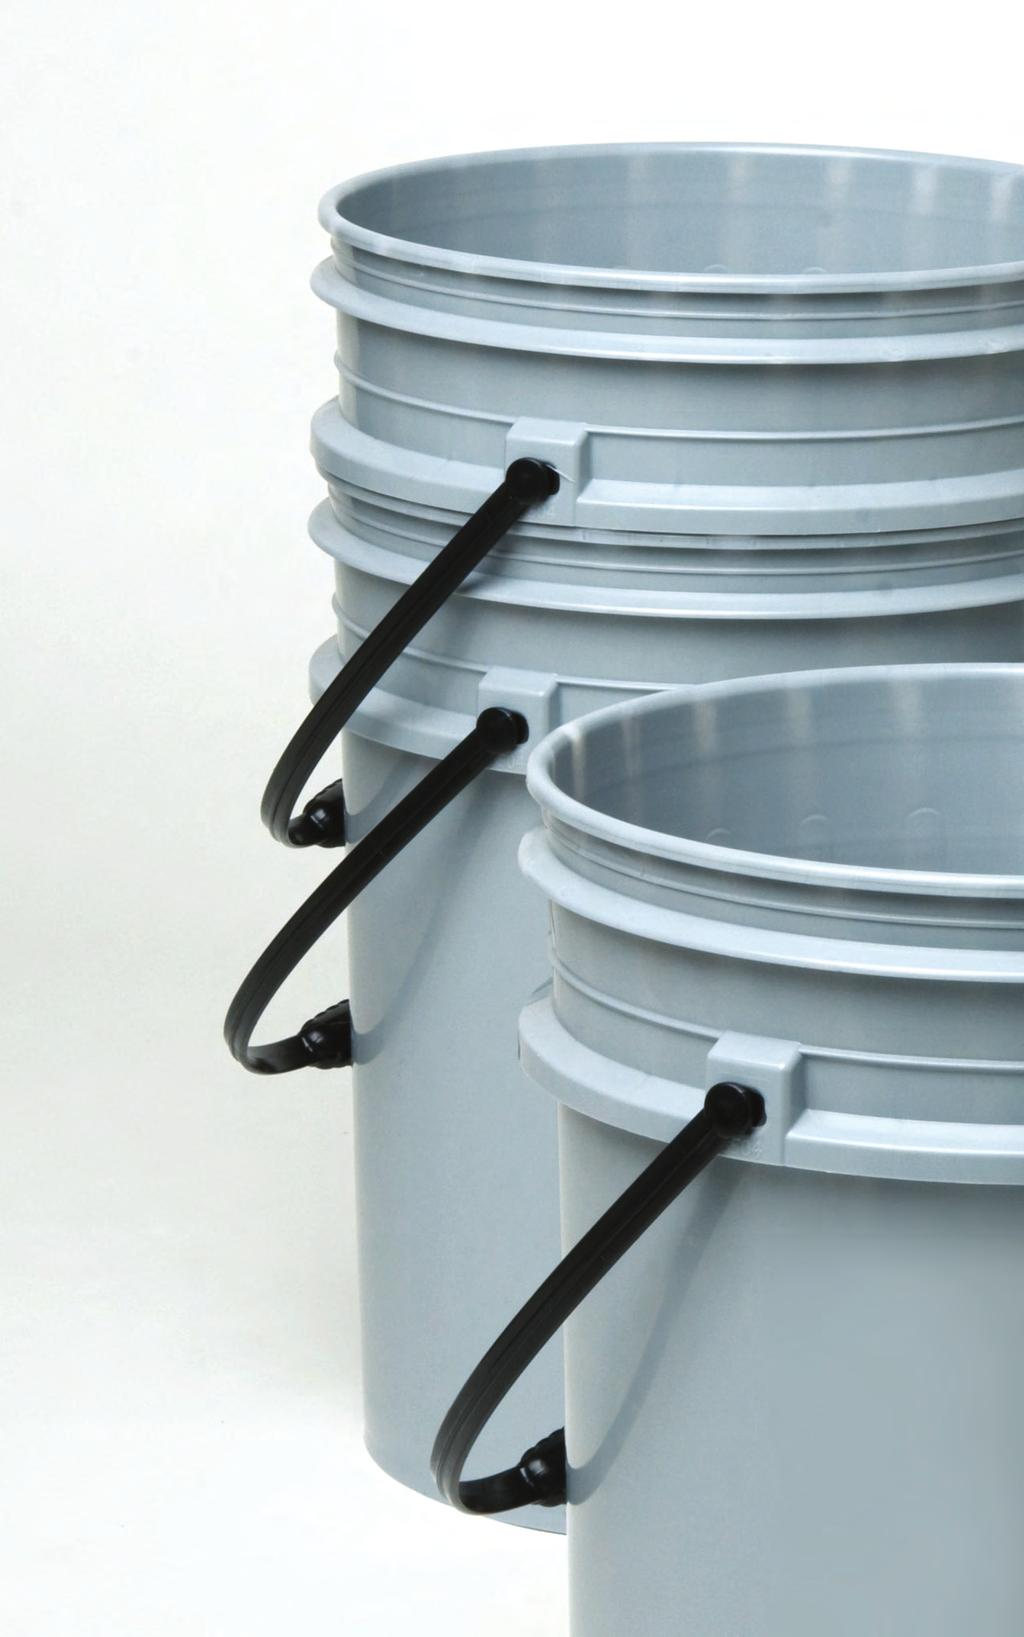 Our plastic products include the open head EC0-PAIL TM,